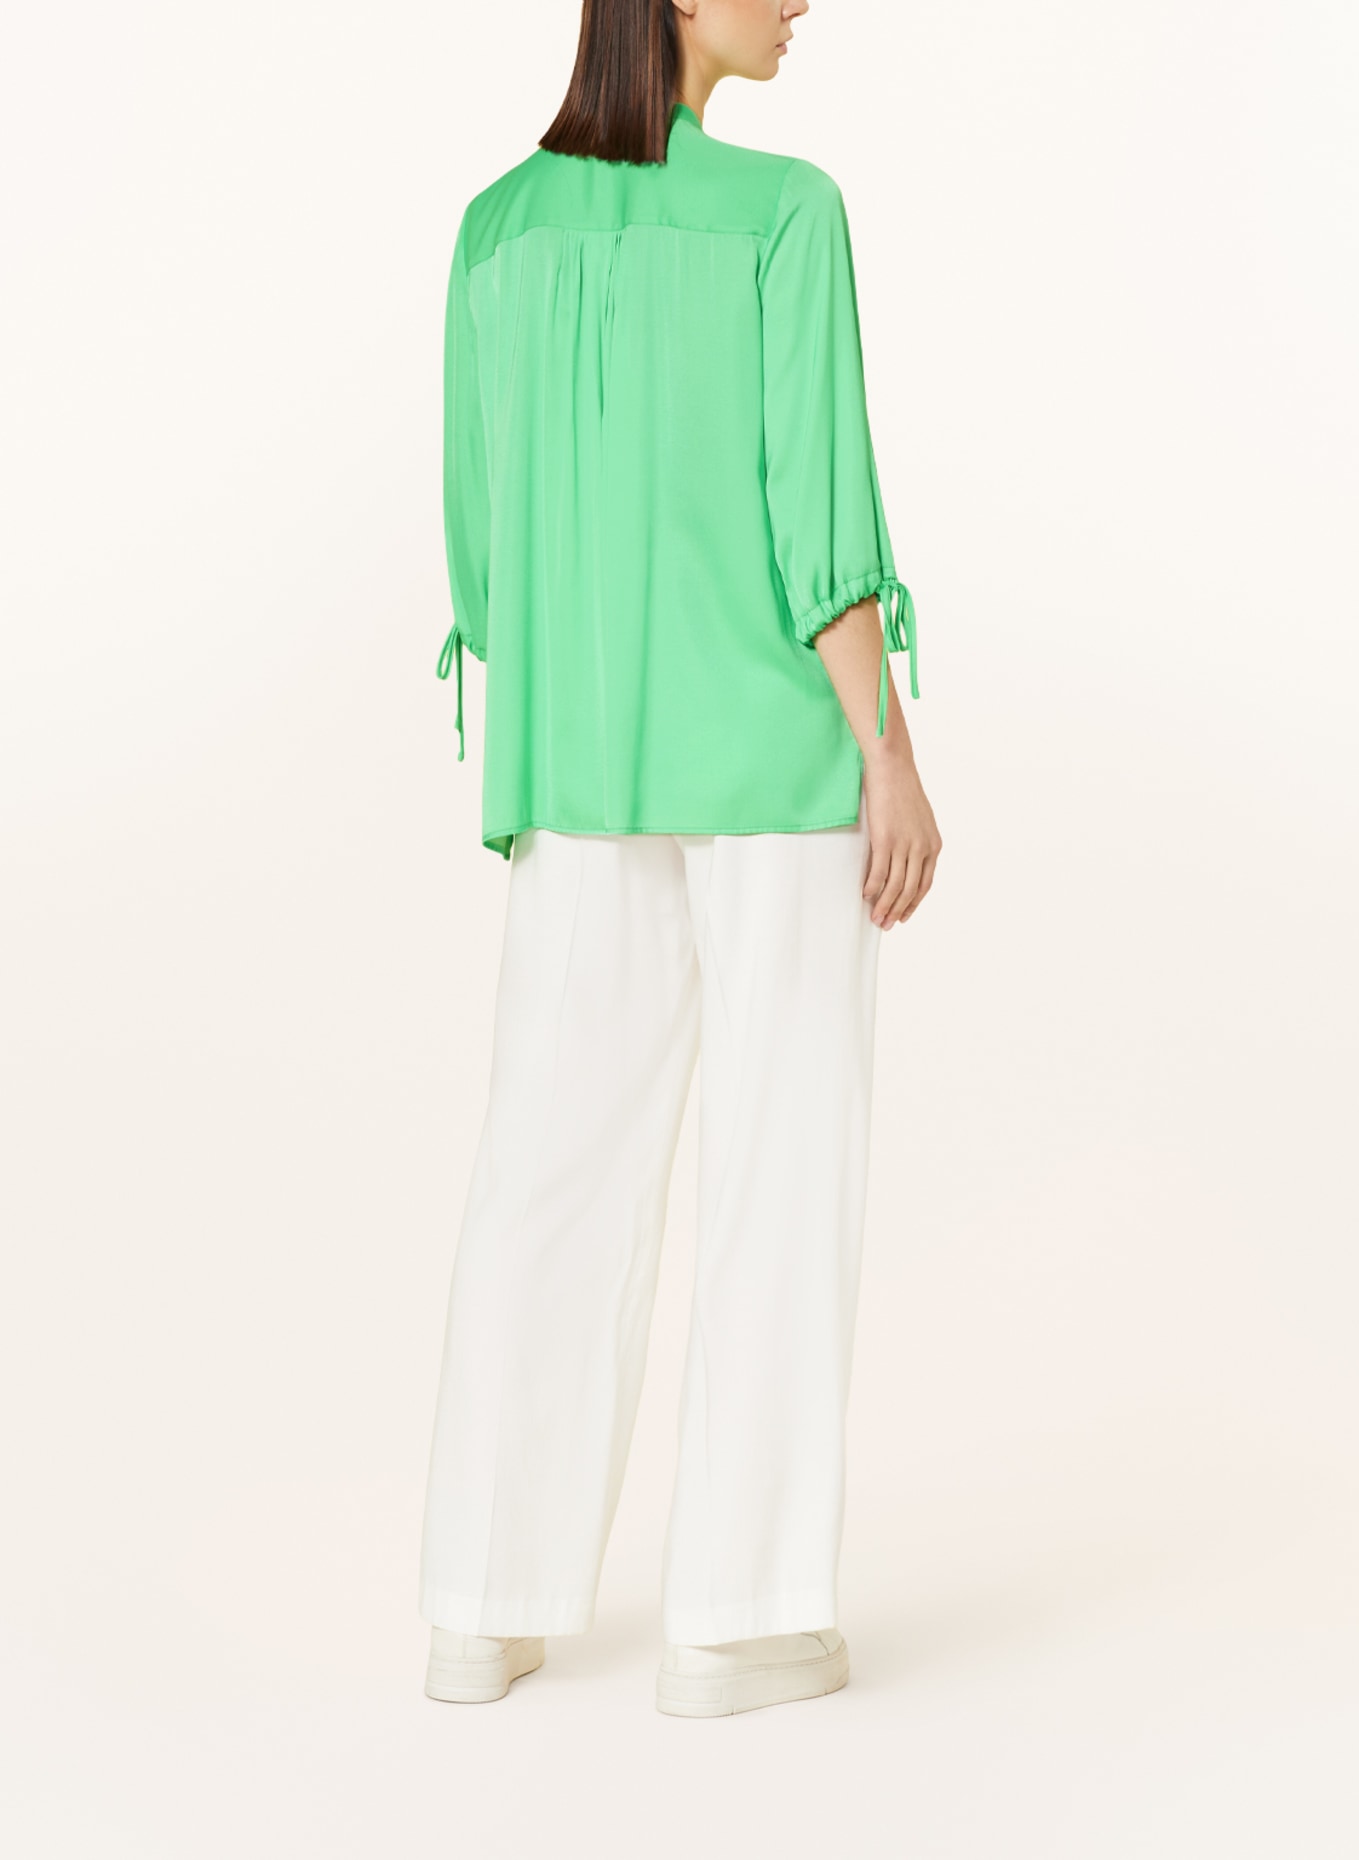 MARC AUREL Shirt blouse made of satin with 3/4 sleeves, Color: GREEN (Image 3)